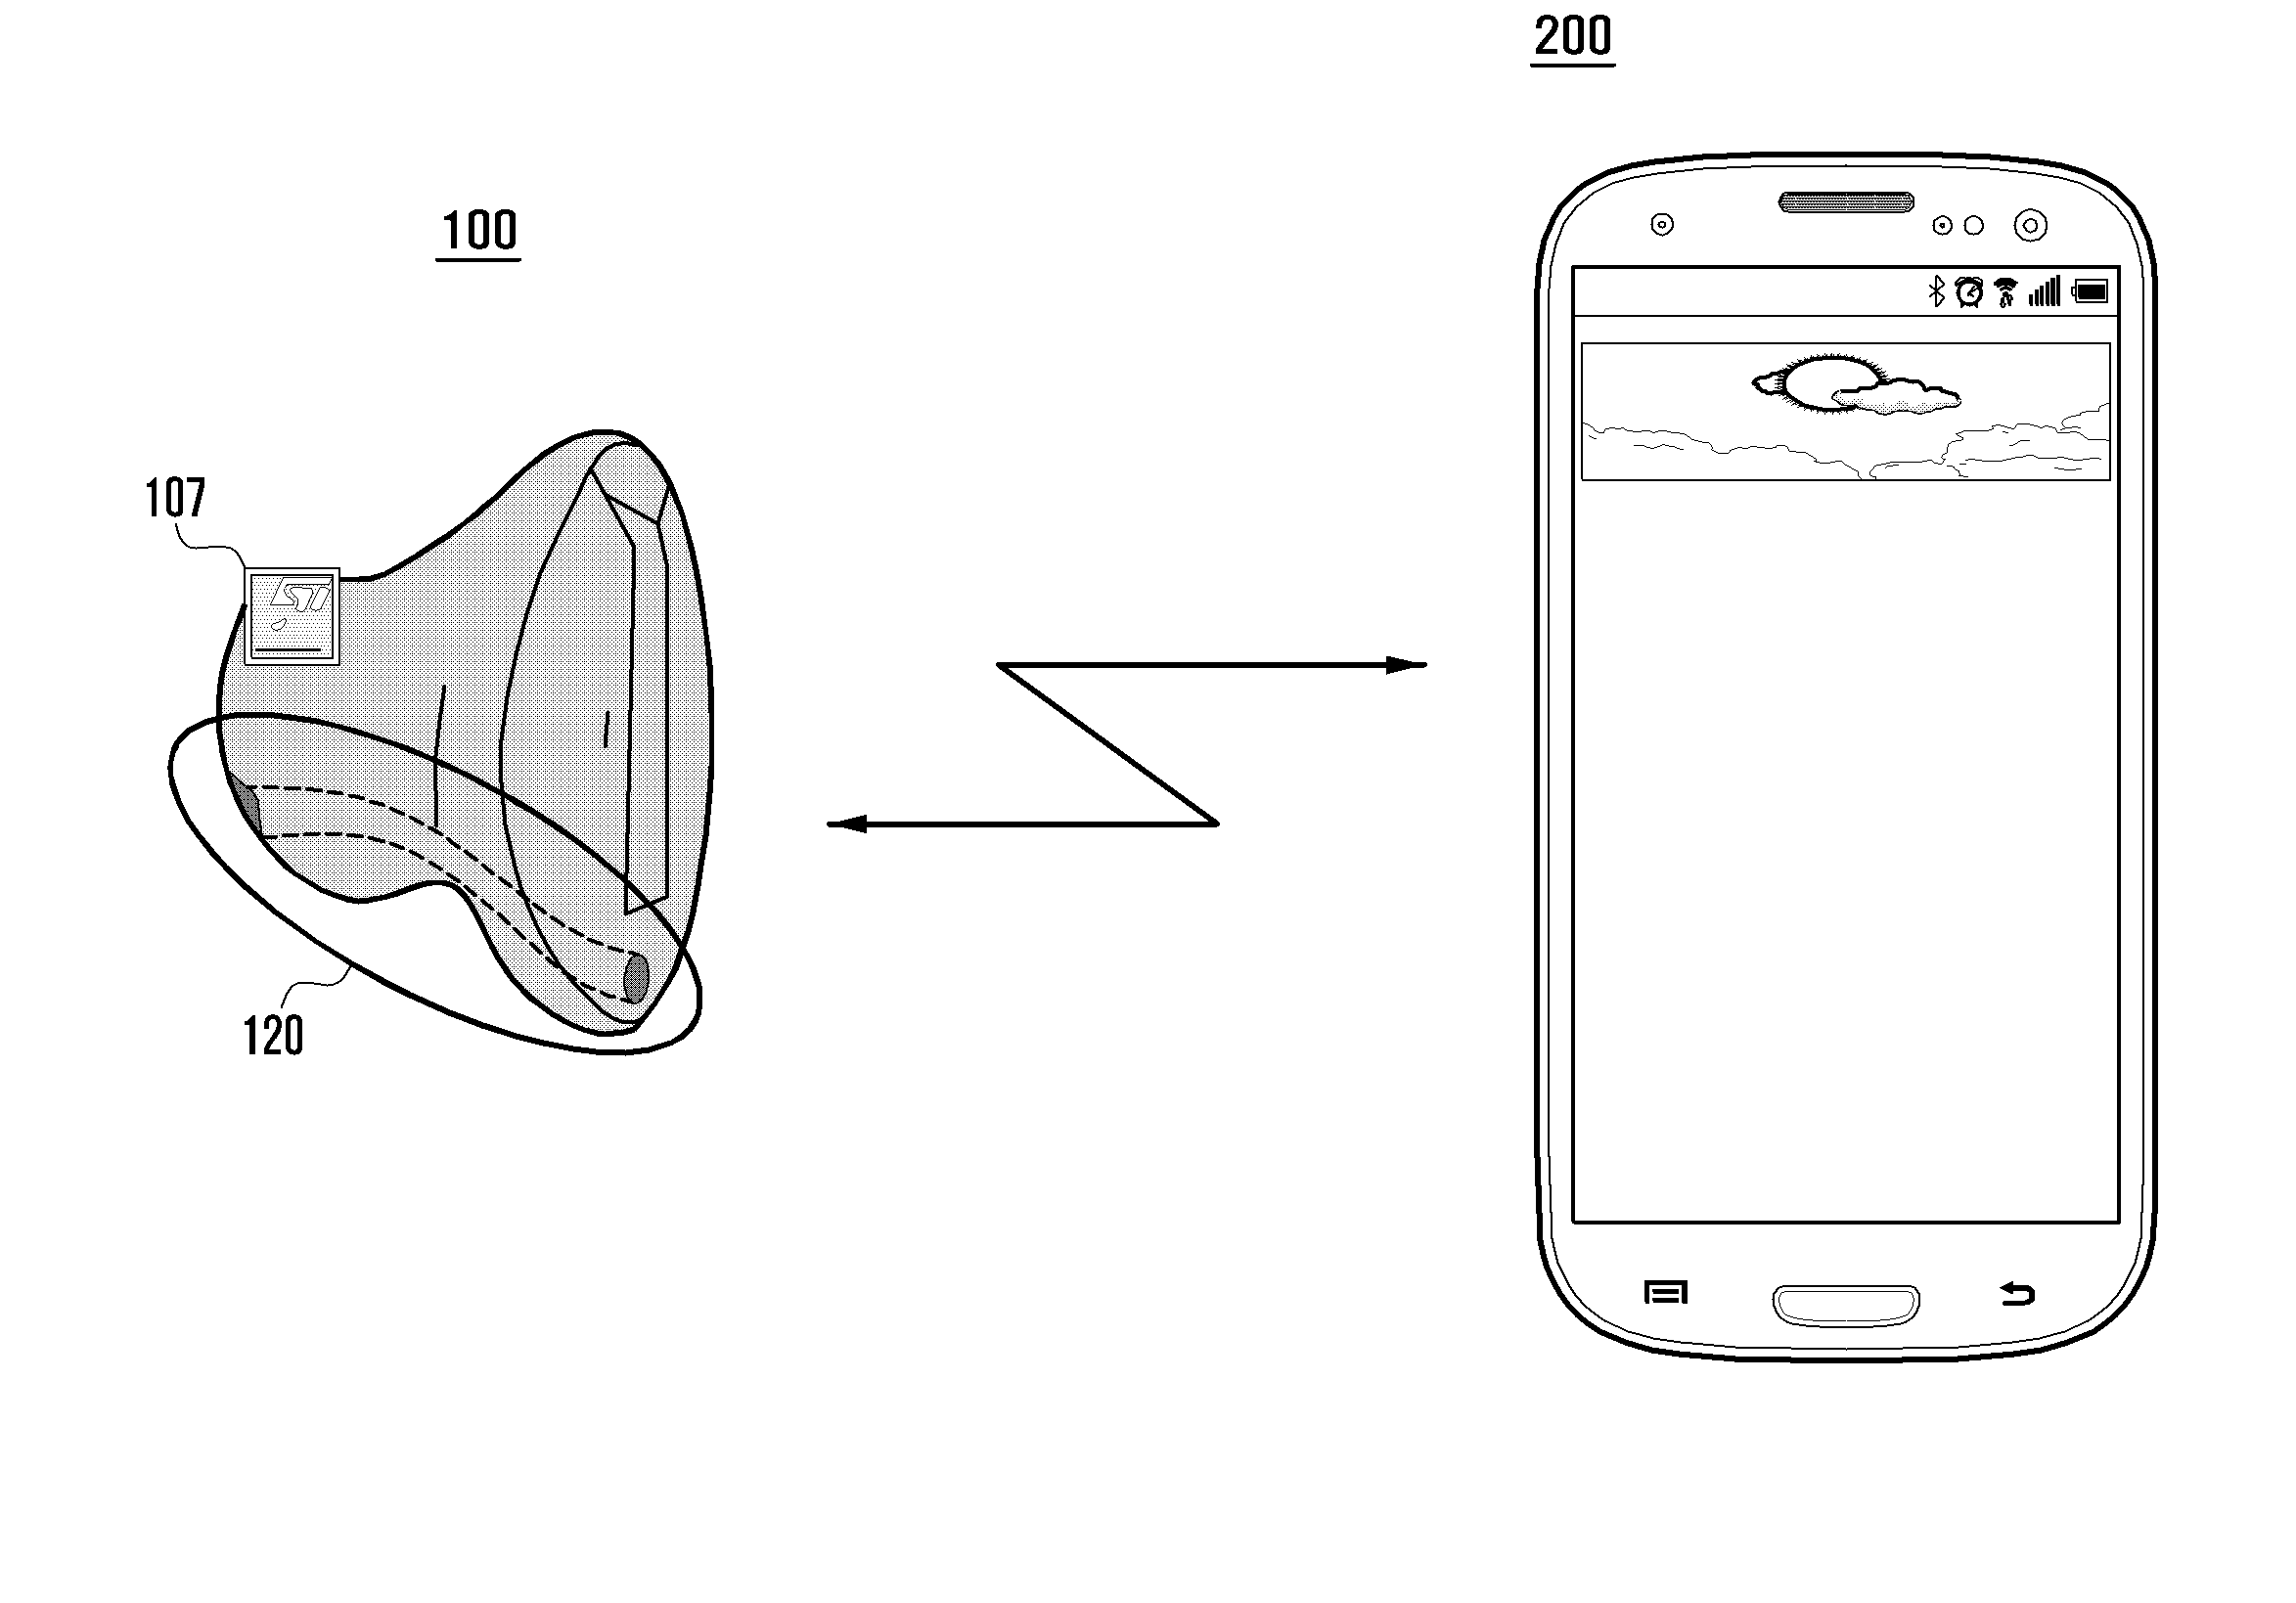 Method and apparatus for adjusting air pressure inside the ear of a person wearing an ear-wearable device